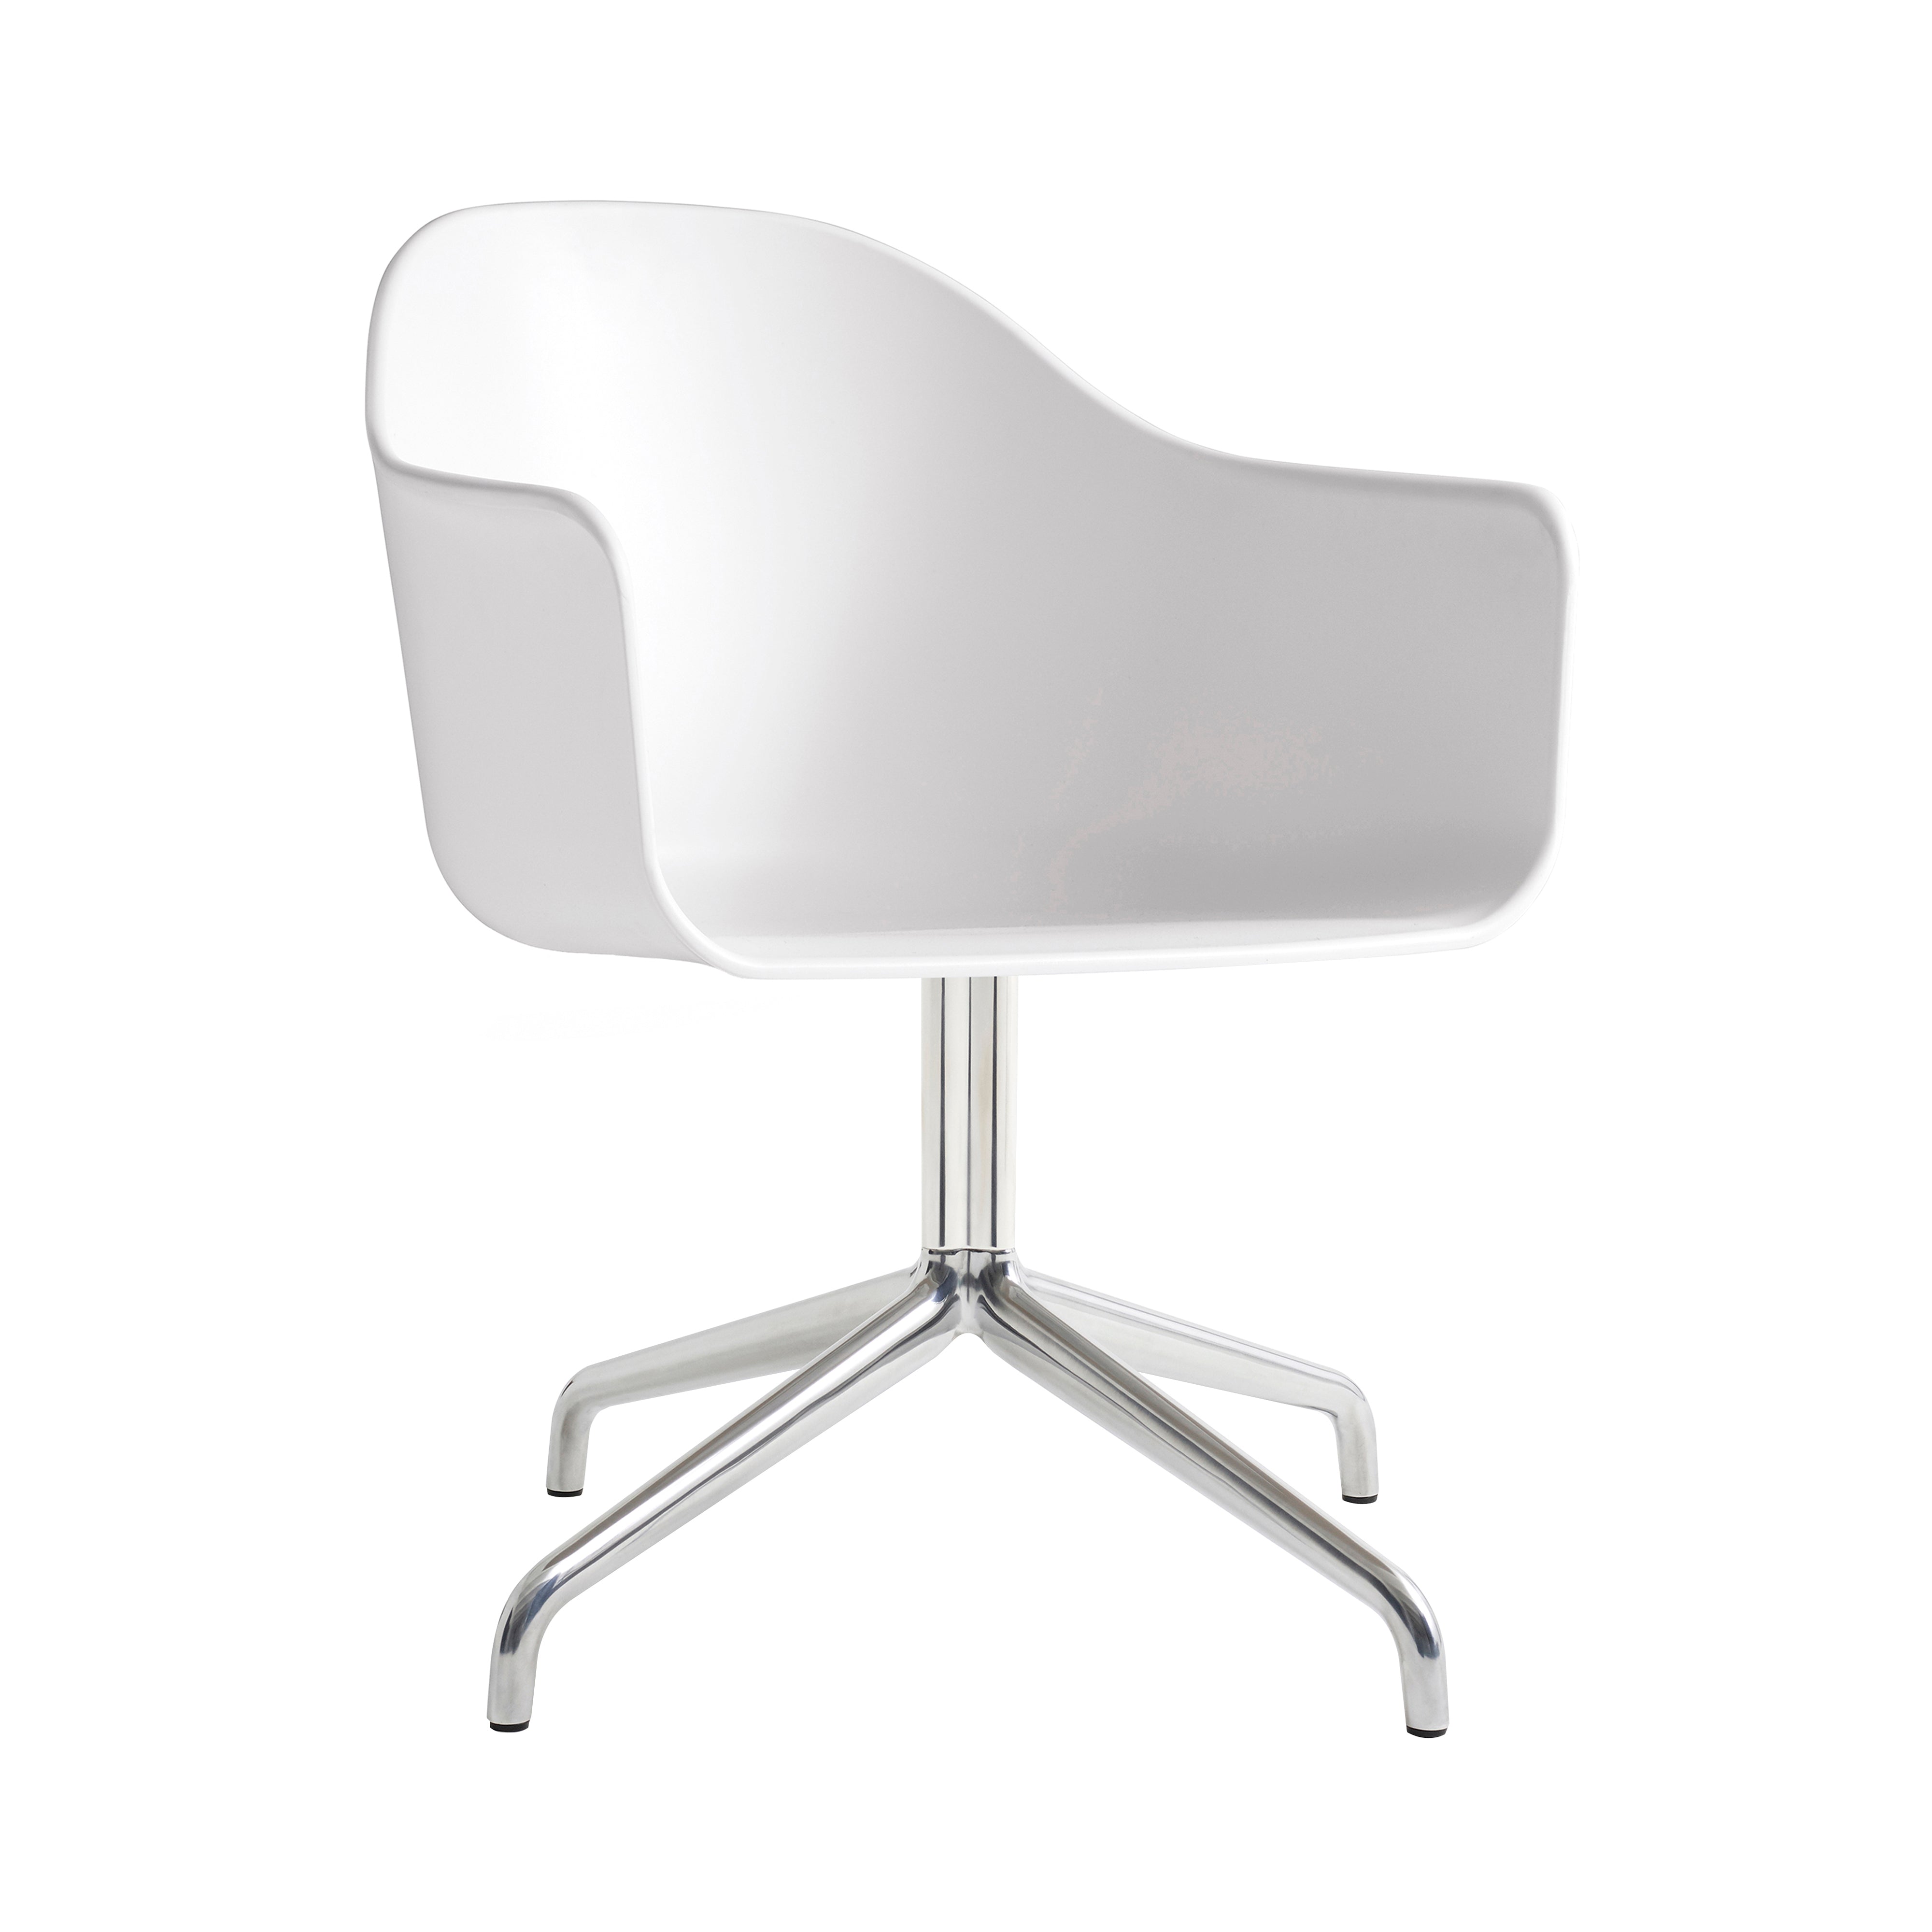 Harbour Dining Chair: Star Base + Polished Aluminum + White